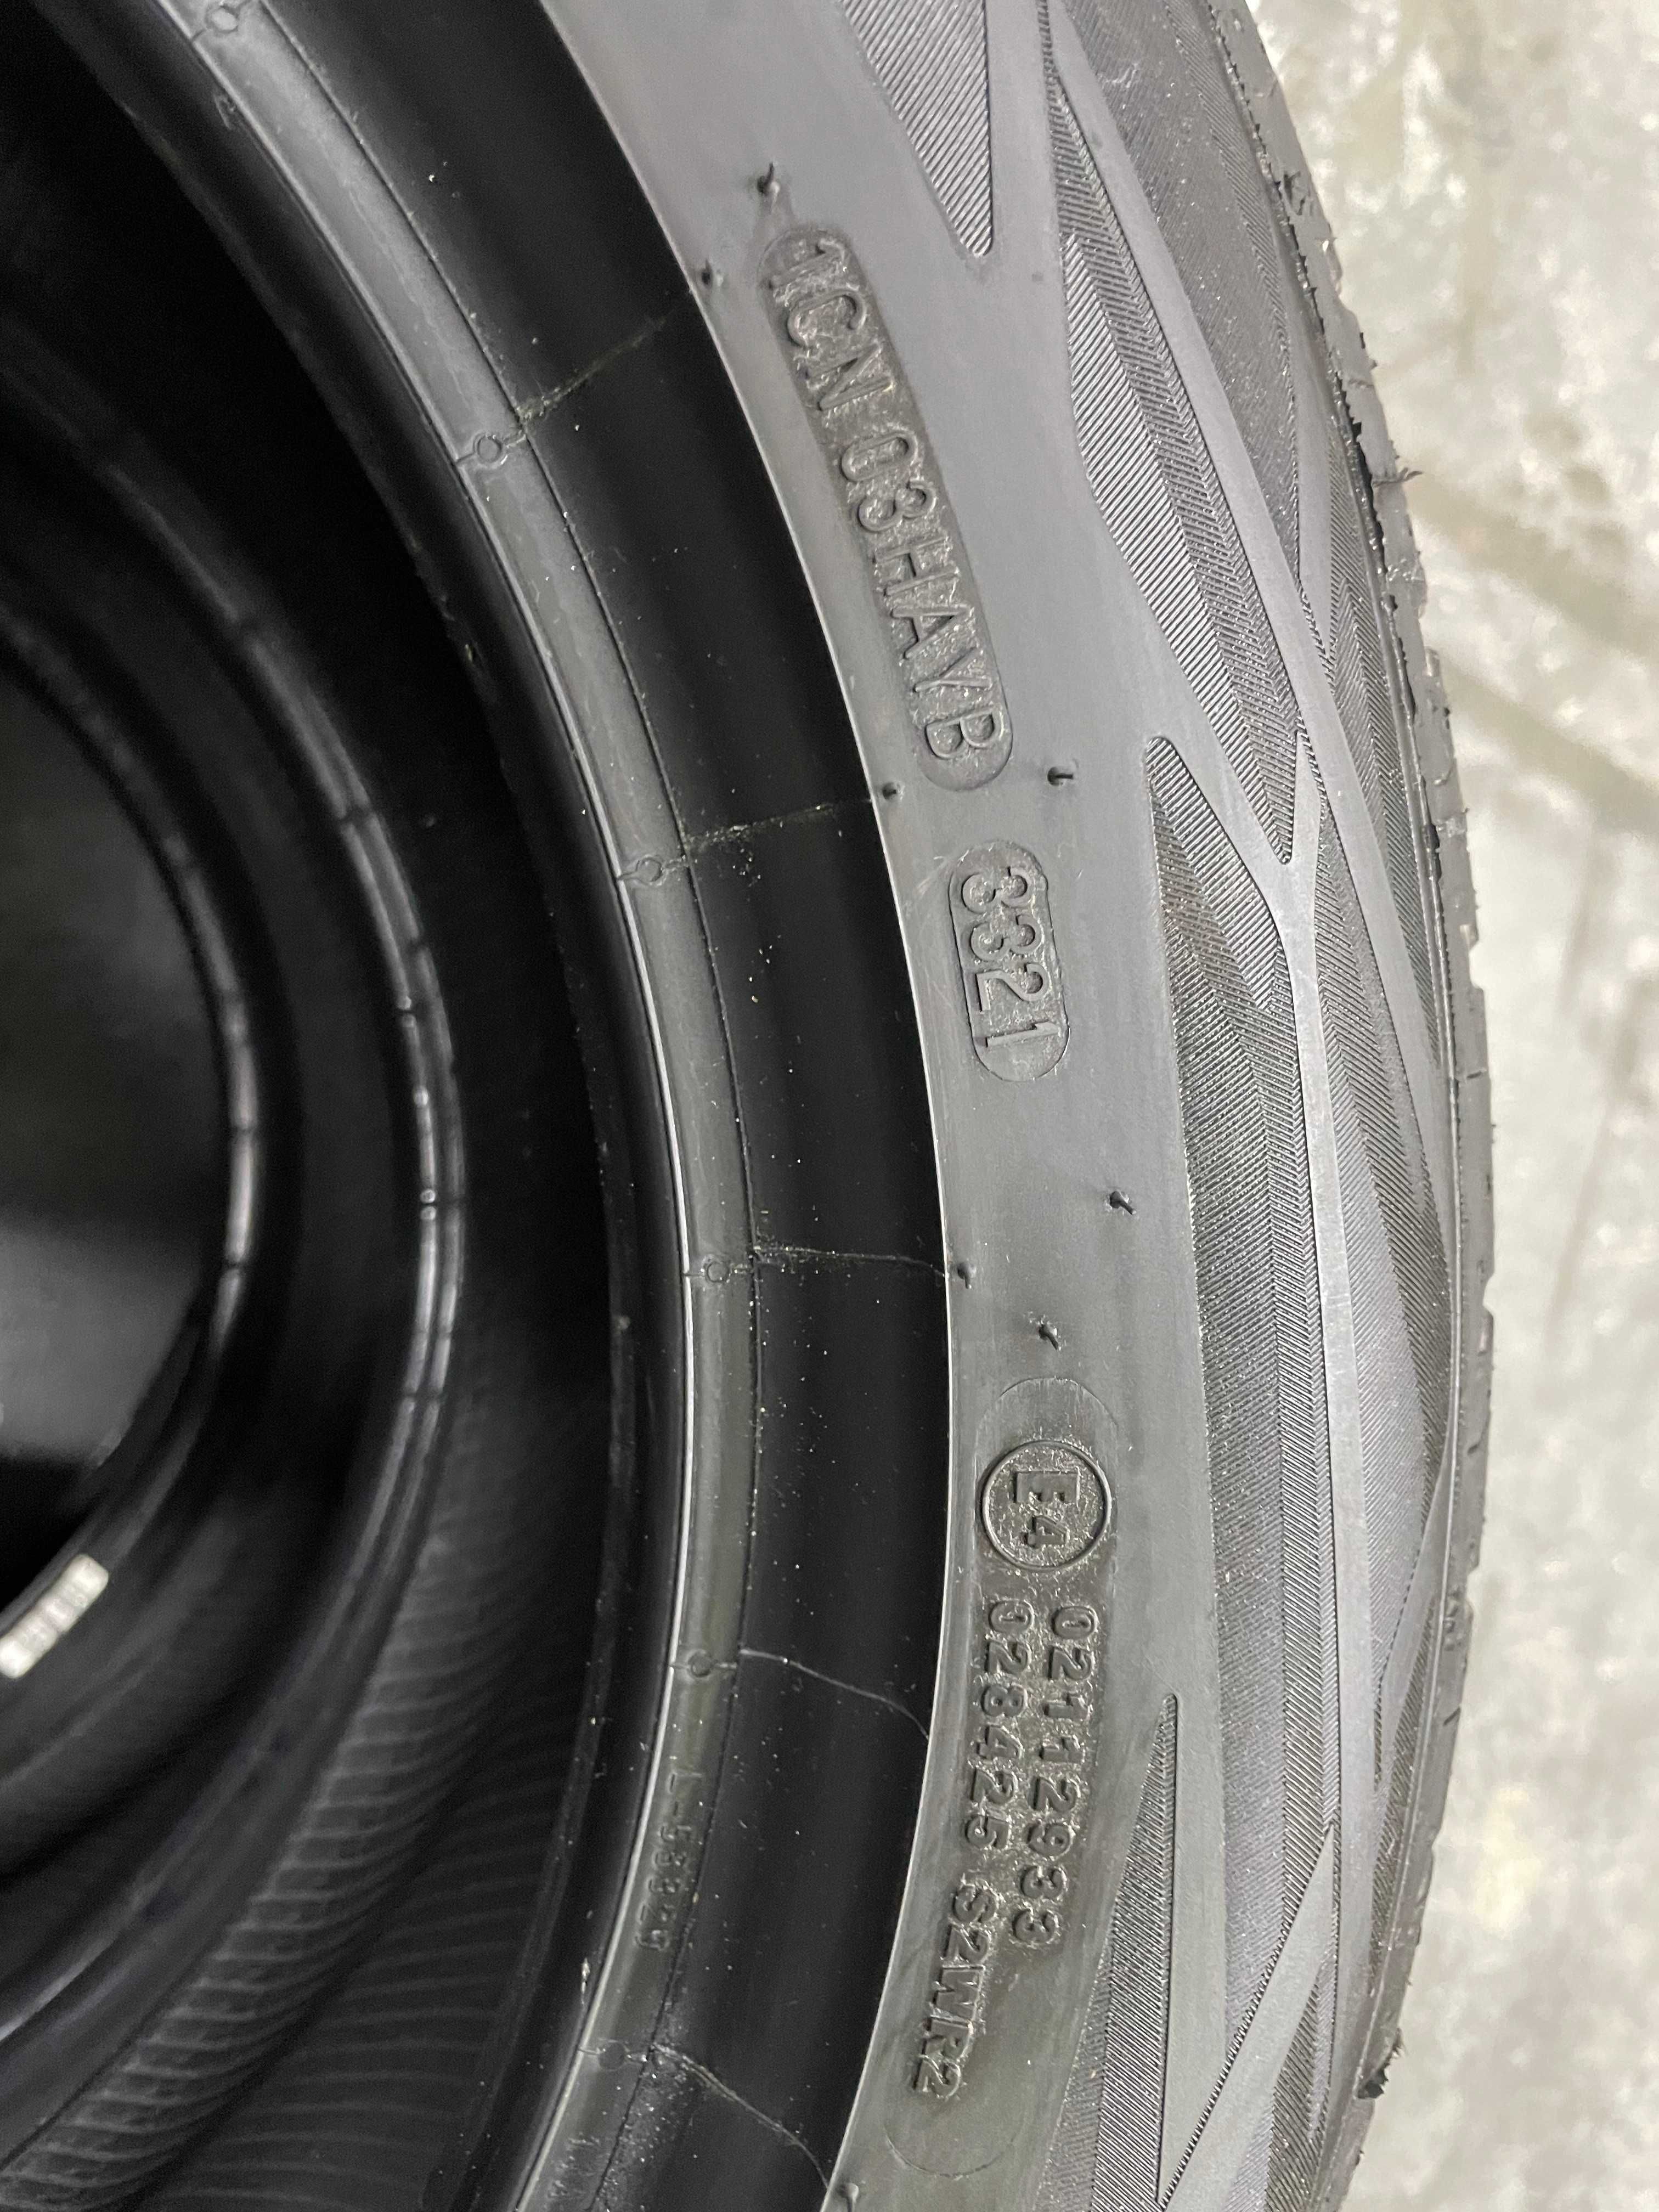 4x Opona 205/55r17 95H XL Continental EcoContact6 Nowe!